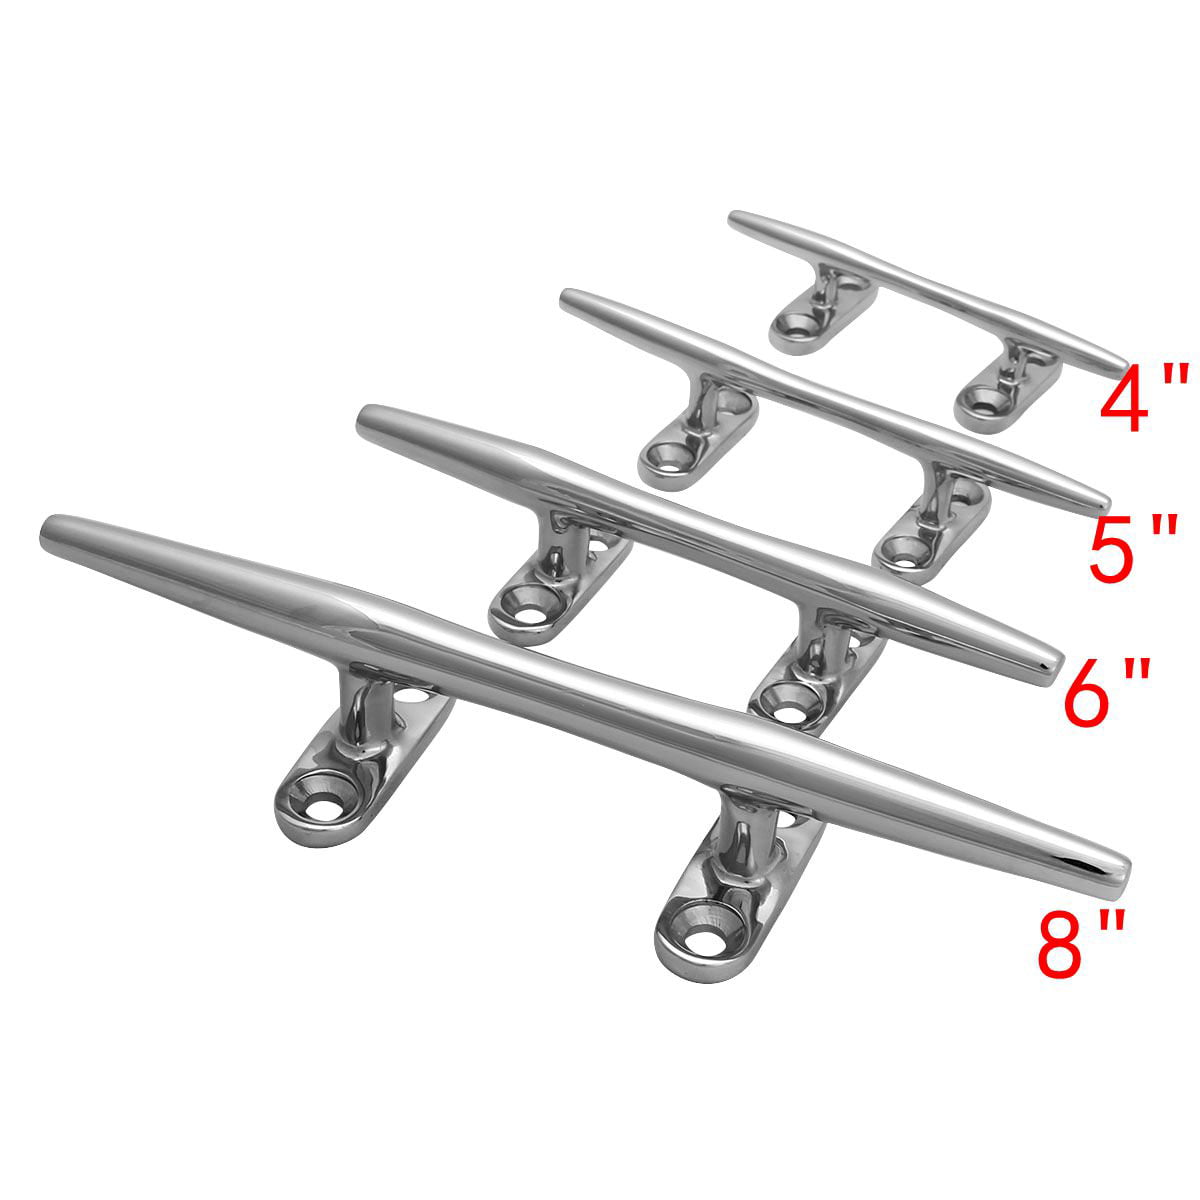 Ouken Rope Deck Cleat 316 Stainless Steel Boat Deck 2 Holes Flat Rope Cleat Dock Mooring Bollard Rope Heavy Duty 1pc 4inches 